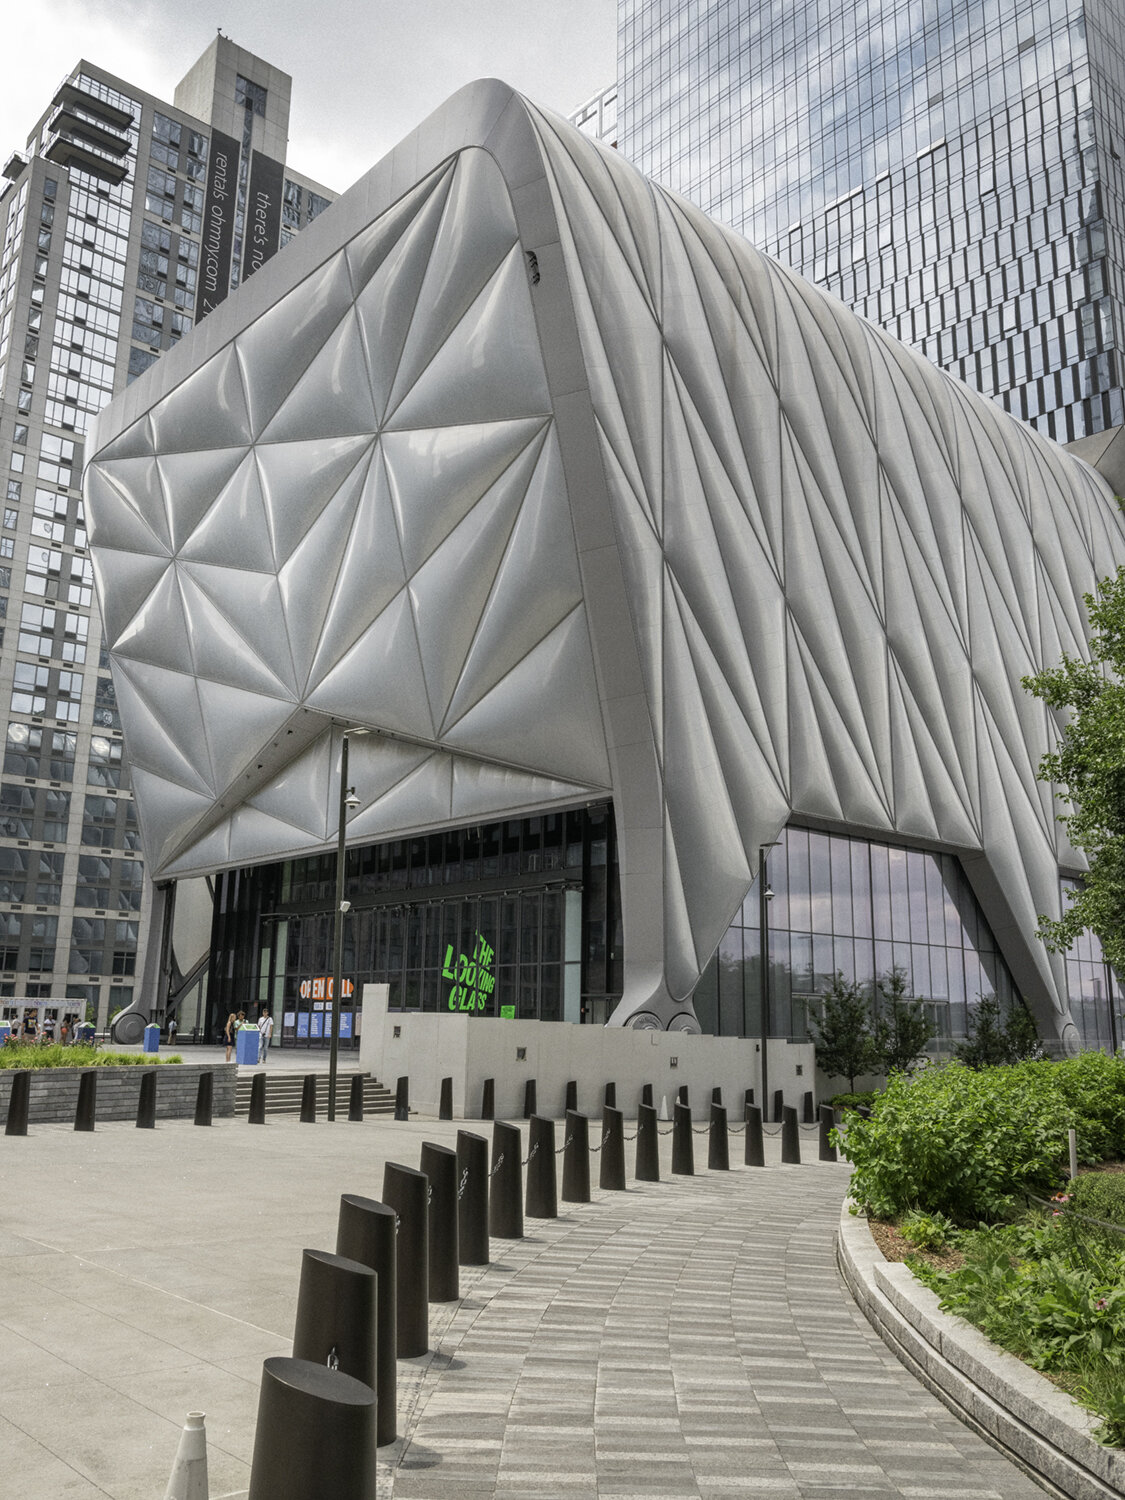 The Shed, Diller Scofidio + Renfro, located in Hudson Yards, NYC. 